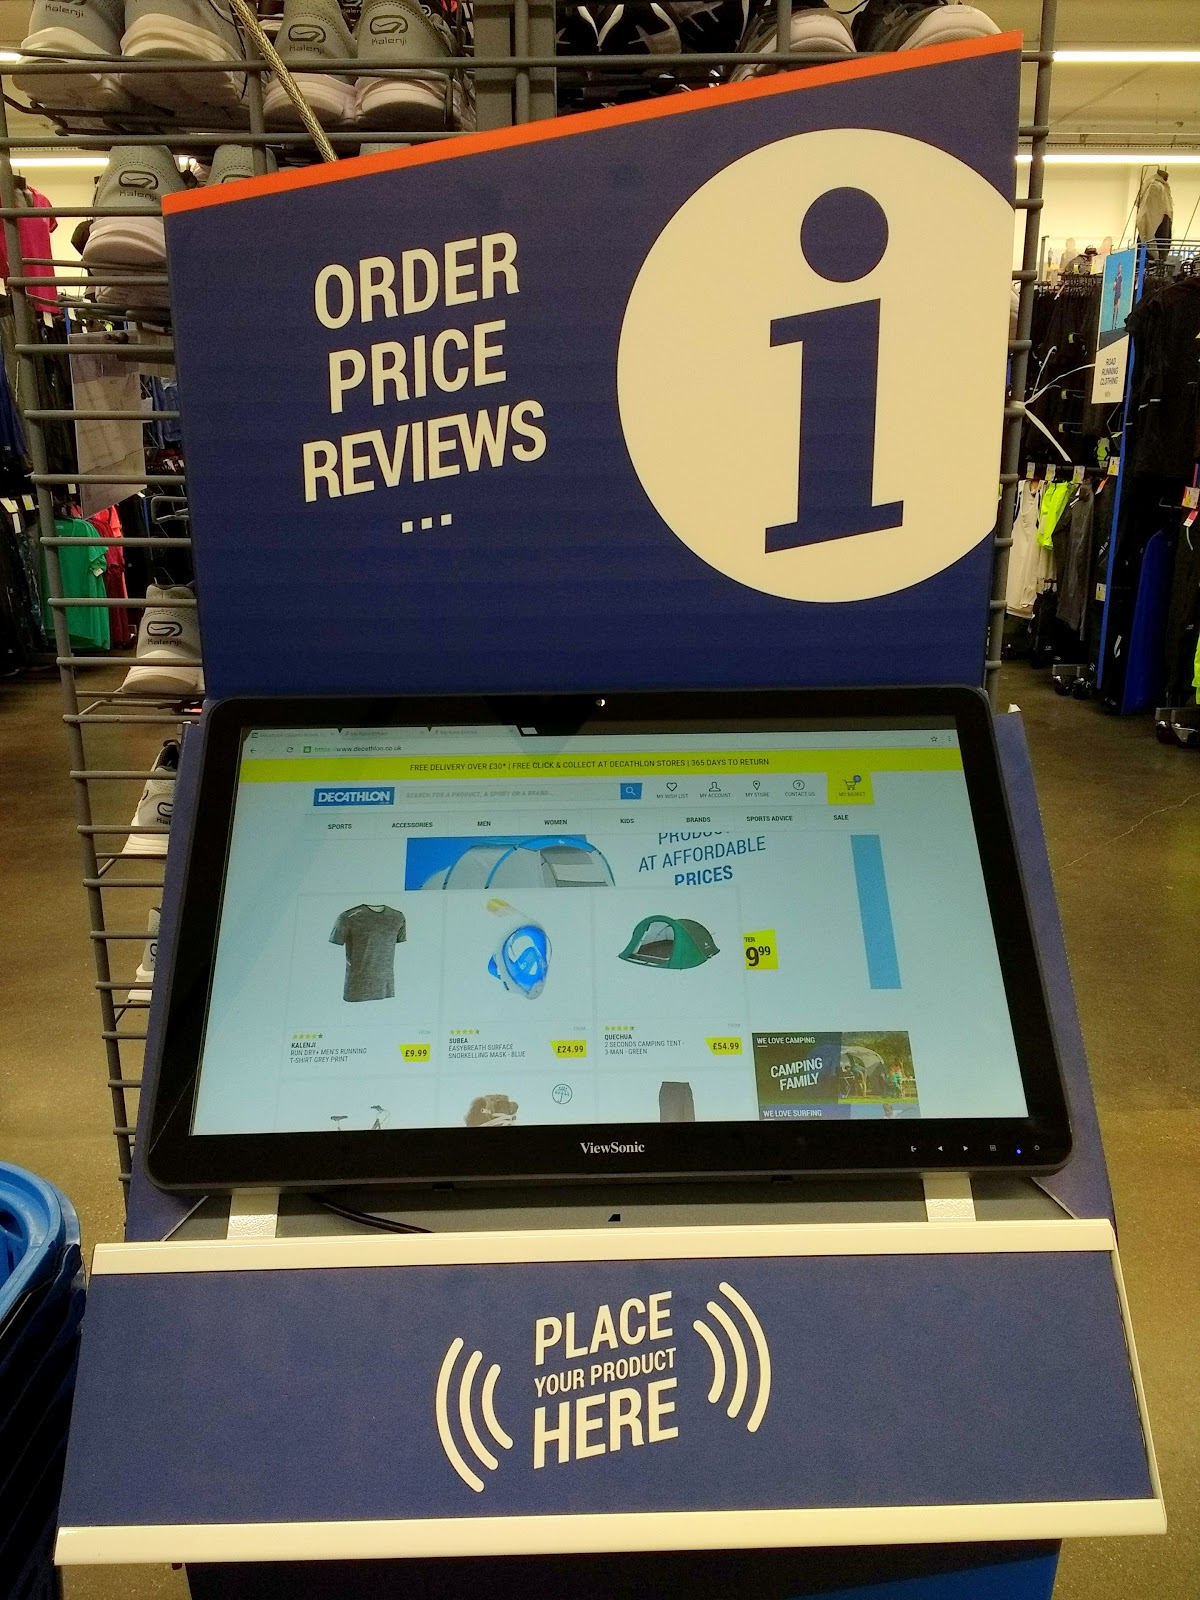 mike downes - we make videos to help people learn: Decathlon USA new store  in San Francisco on Maps Pushpin for Streetview front of store versus back